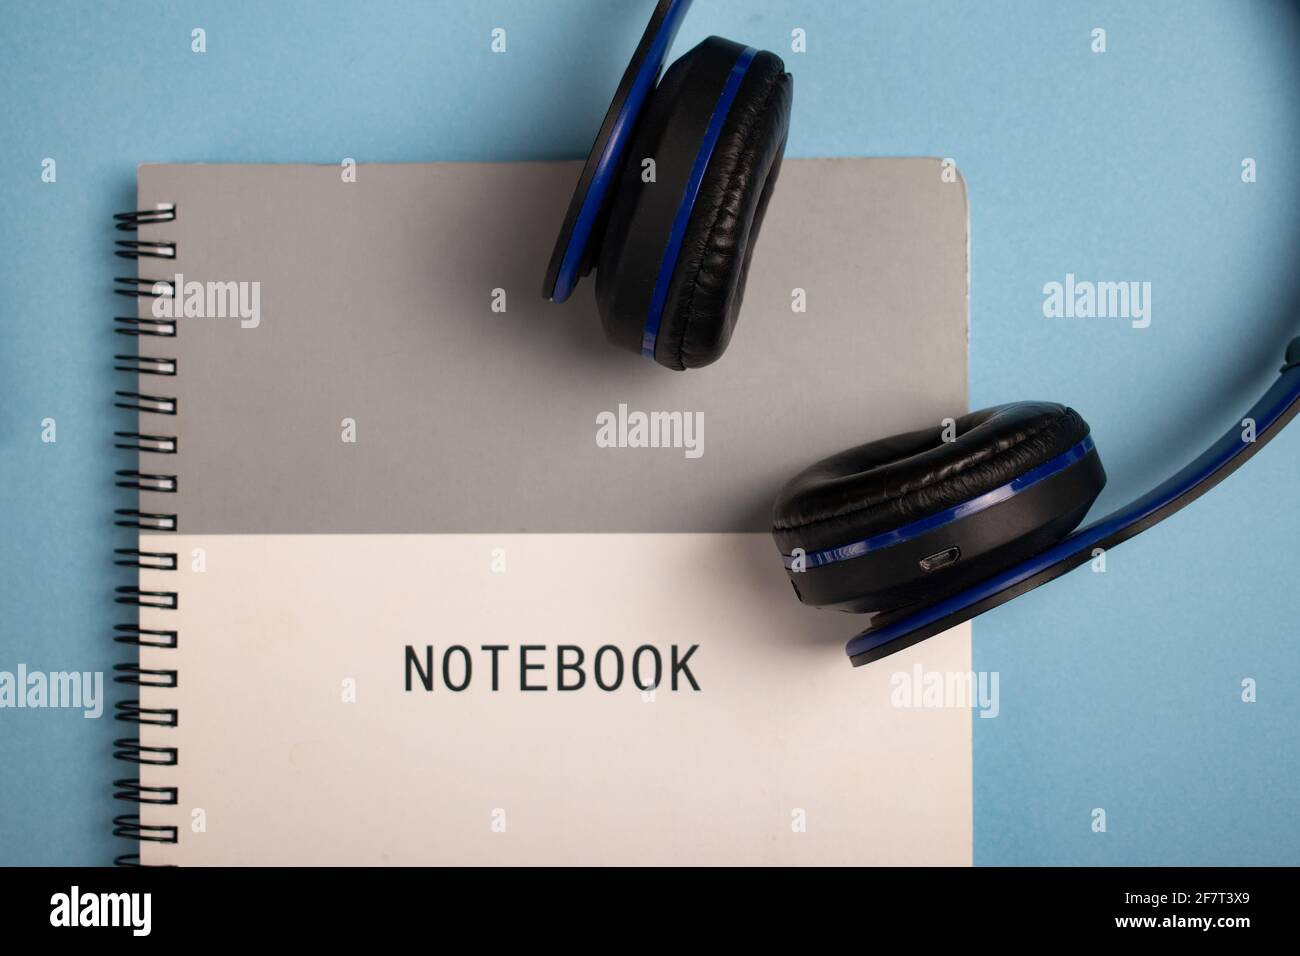 Notebook and headphones on a blue surface Stock Photo